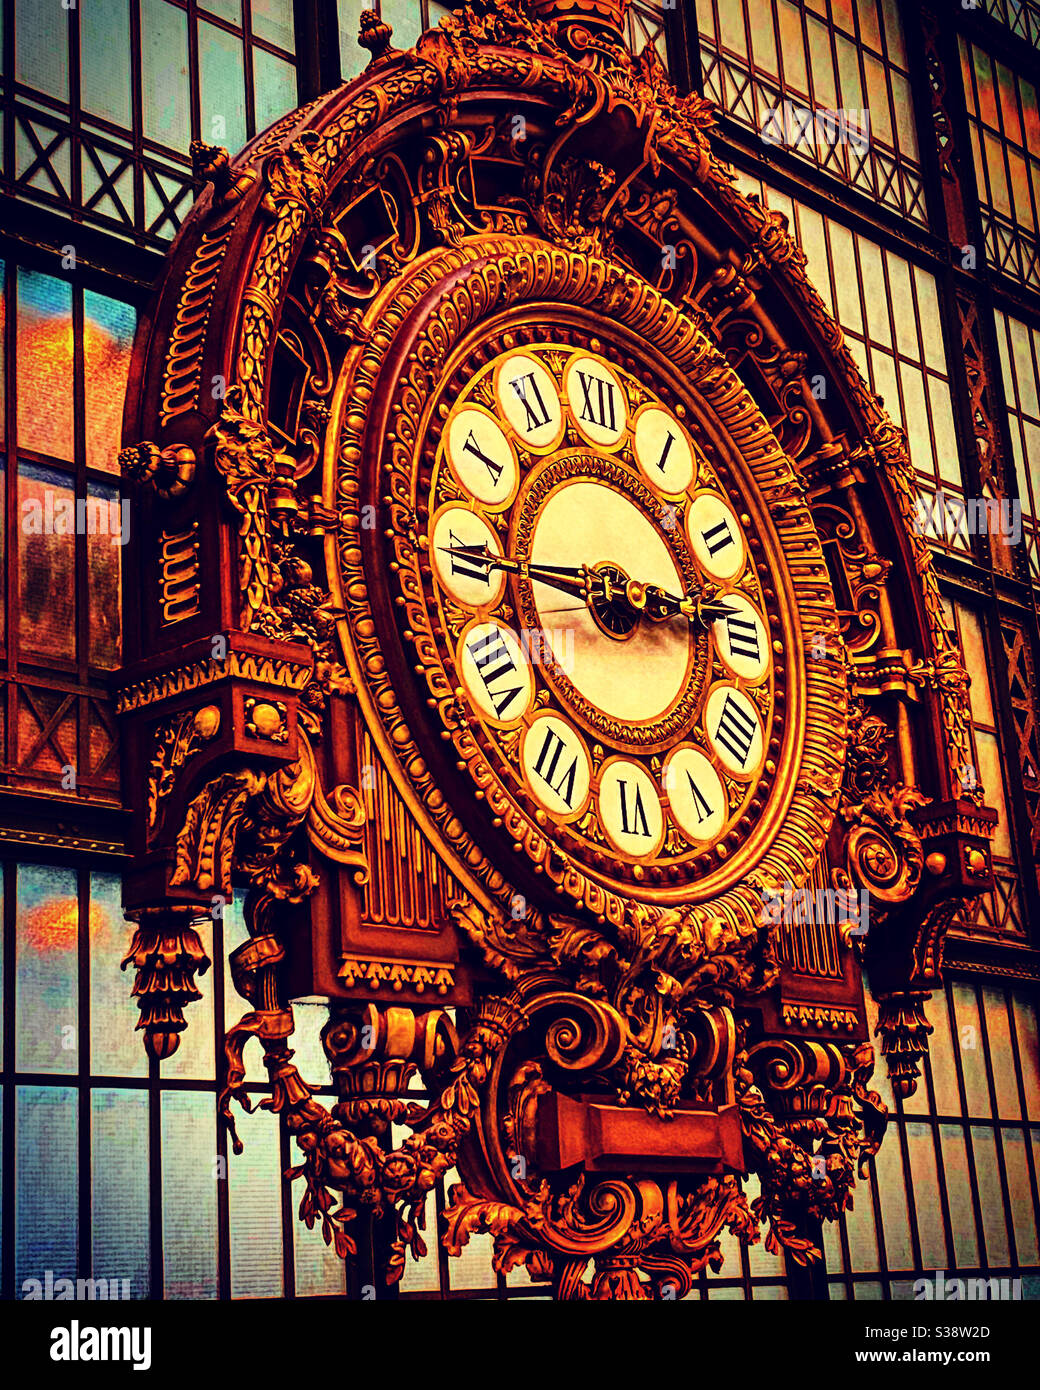 Giant old style vintage look public clock in gold color Stock Photo